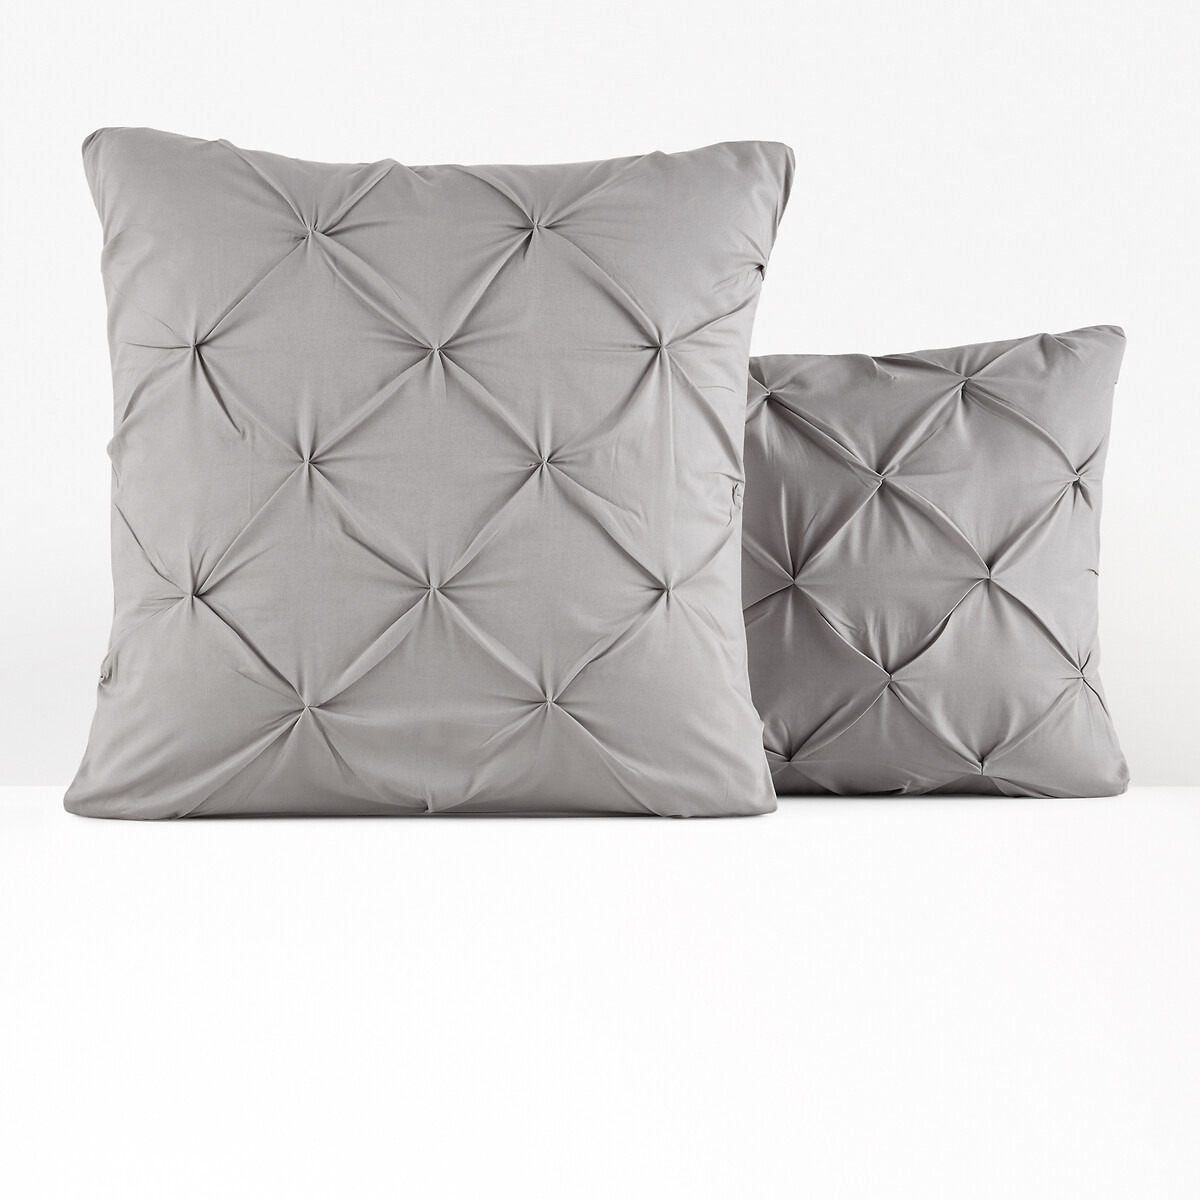 Blanche Ruched Polycotton Pillowcase - image 1